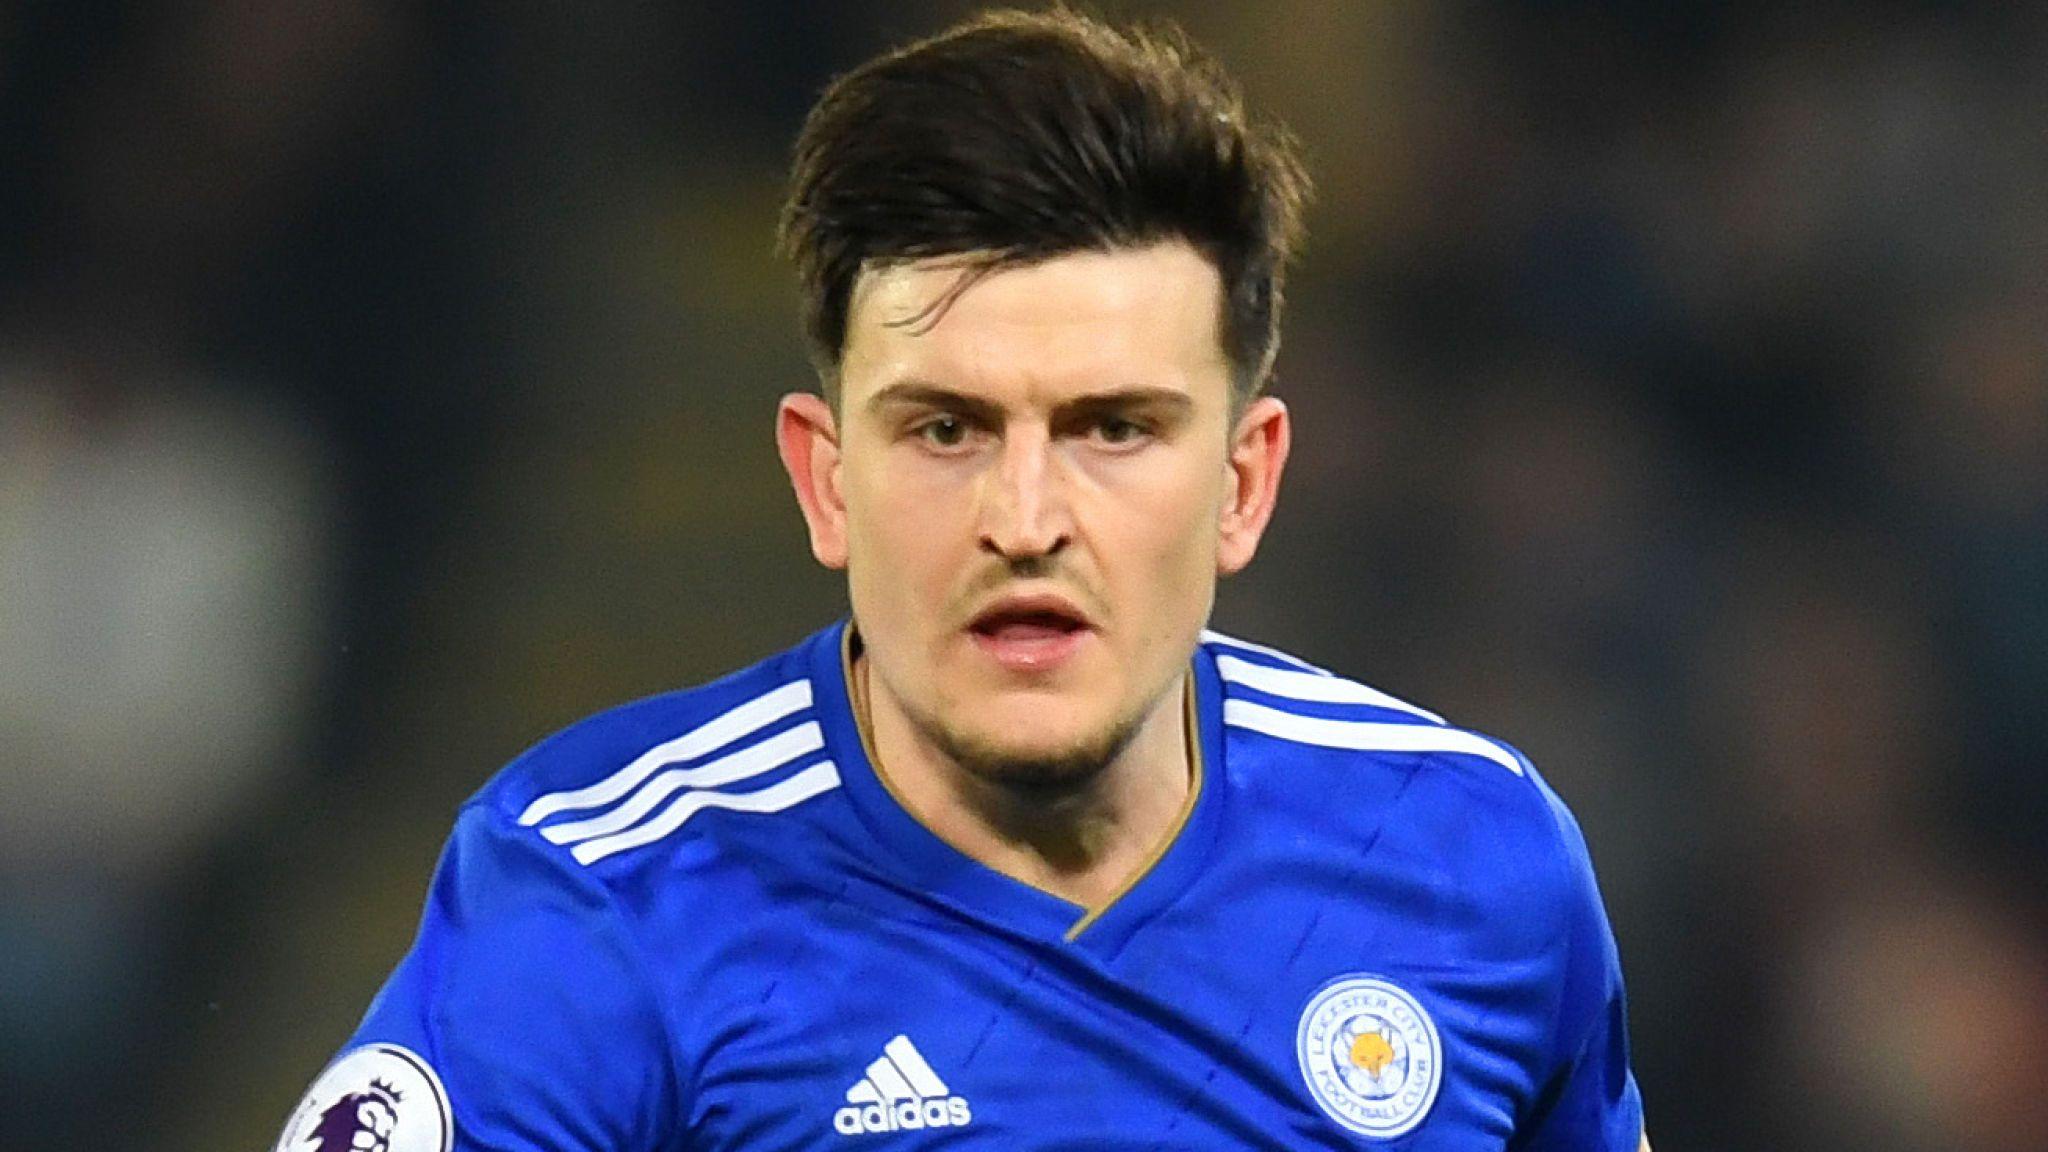 Transfer Talk: Man Utd look to overhaul defence with Harry Maguire